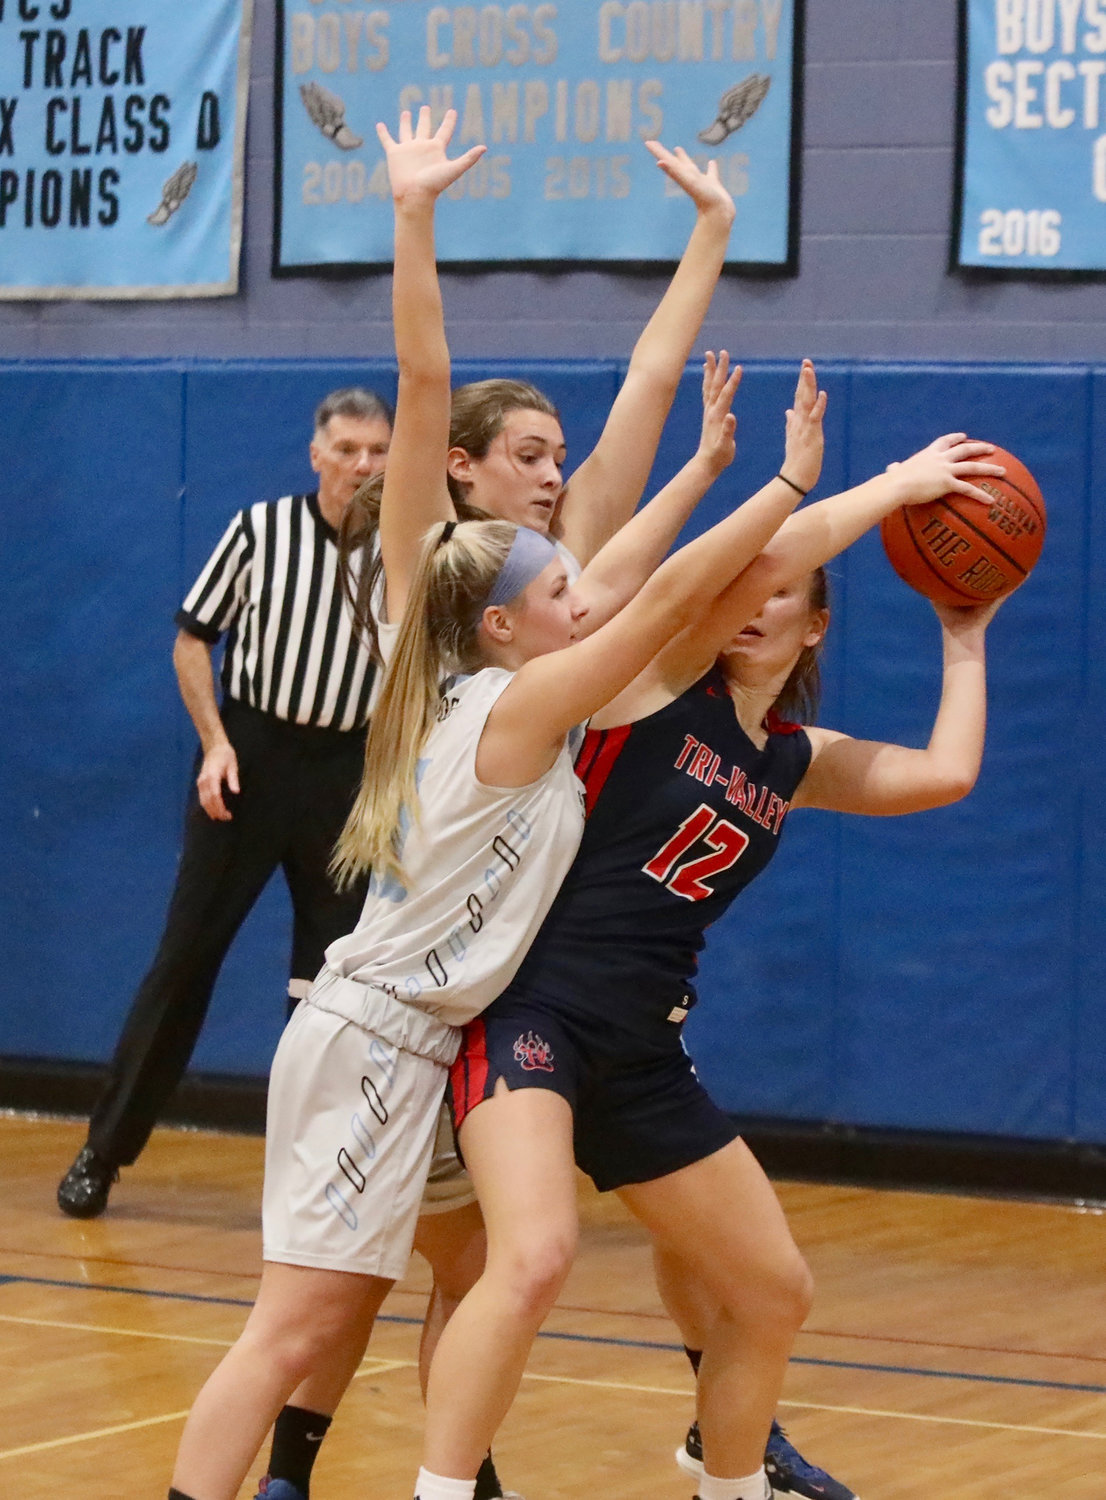 Sullivan West’s Abby Parucki (foreground) and Felicity Bauerfeind hem in T-V’s Mackenzie Closs. SW’s defense was stifling and key in their 41-34 league win.